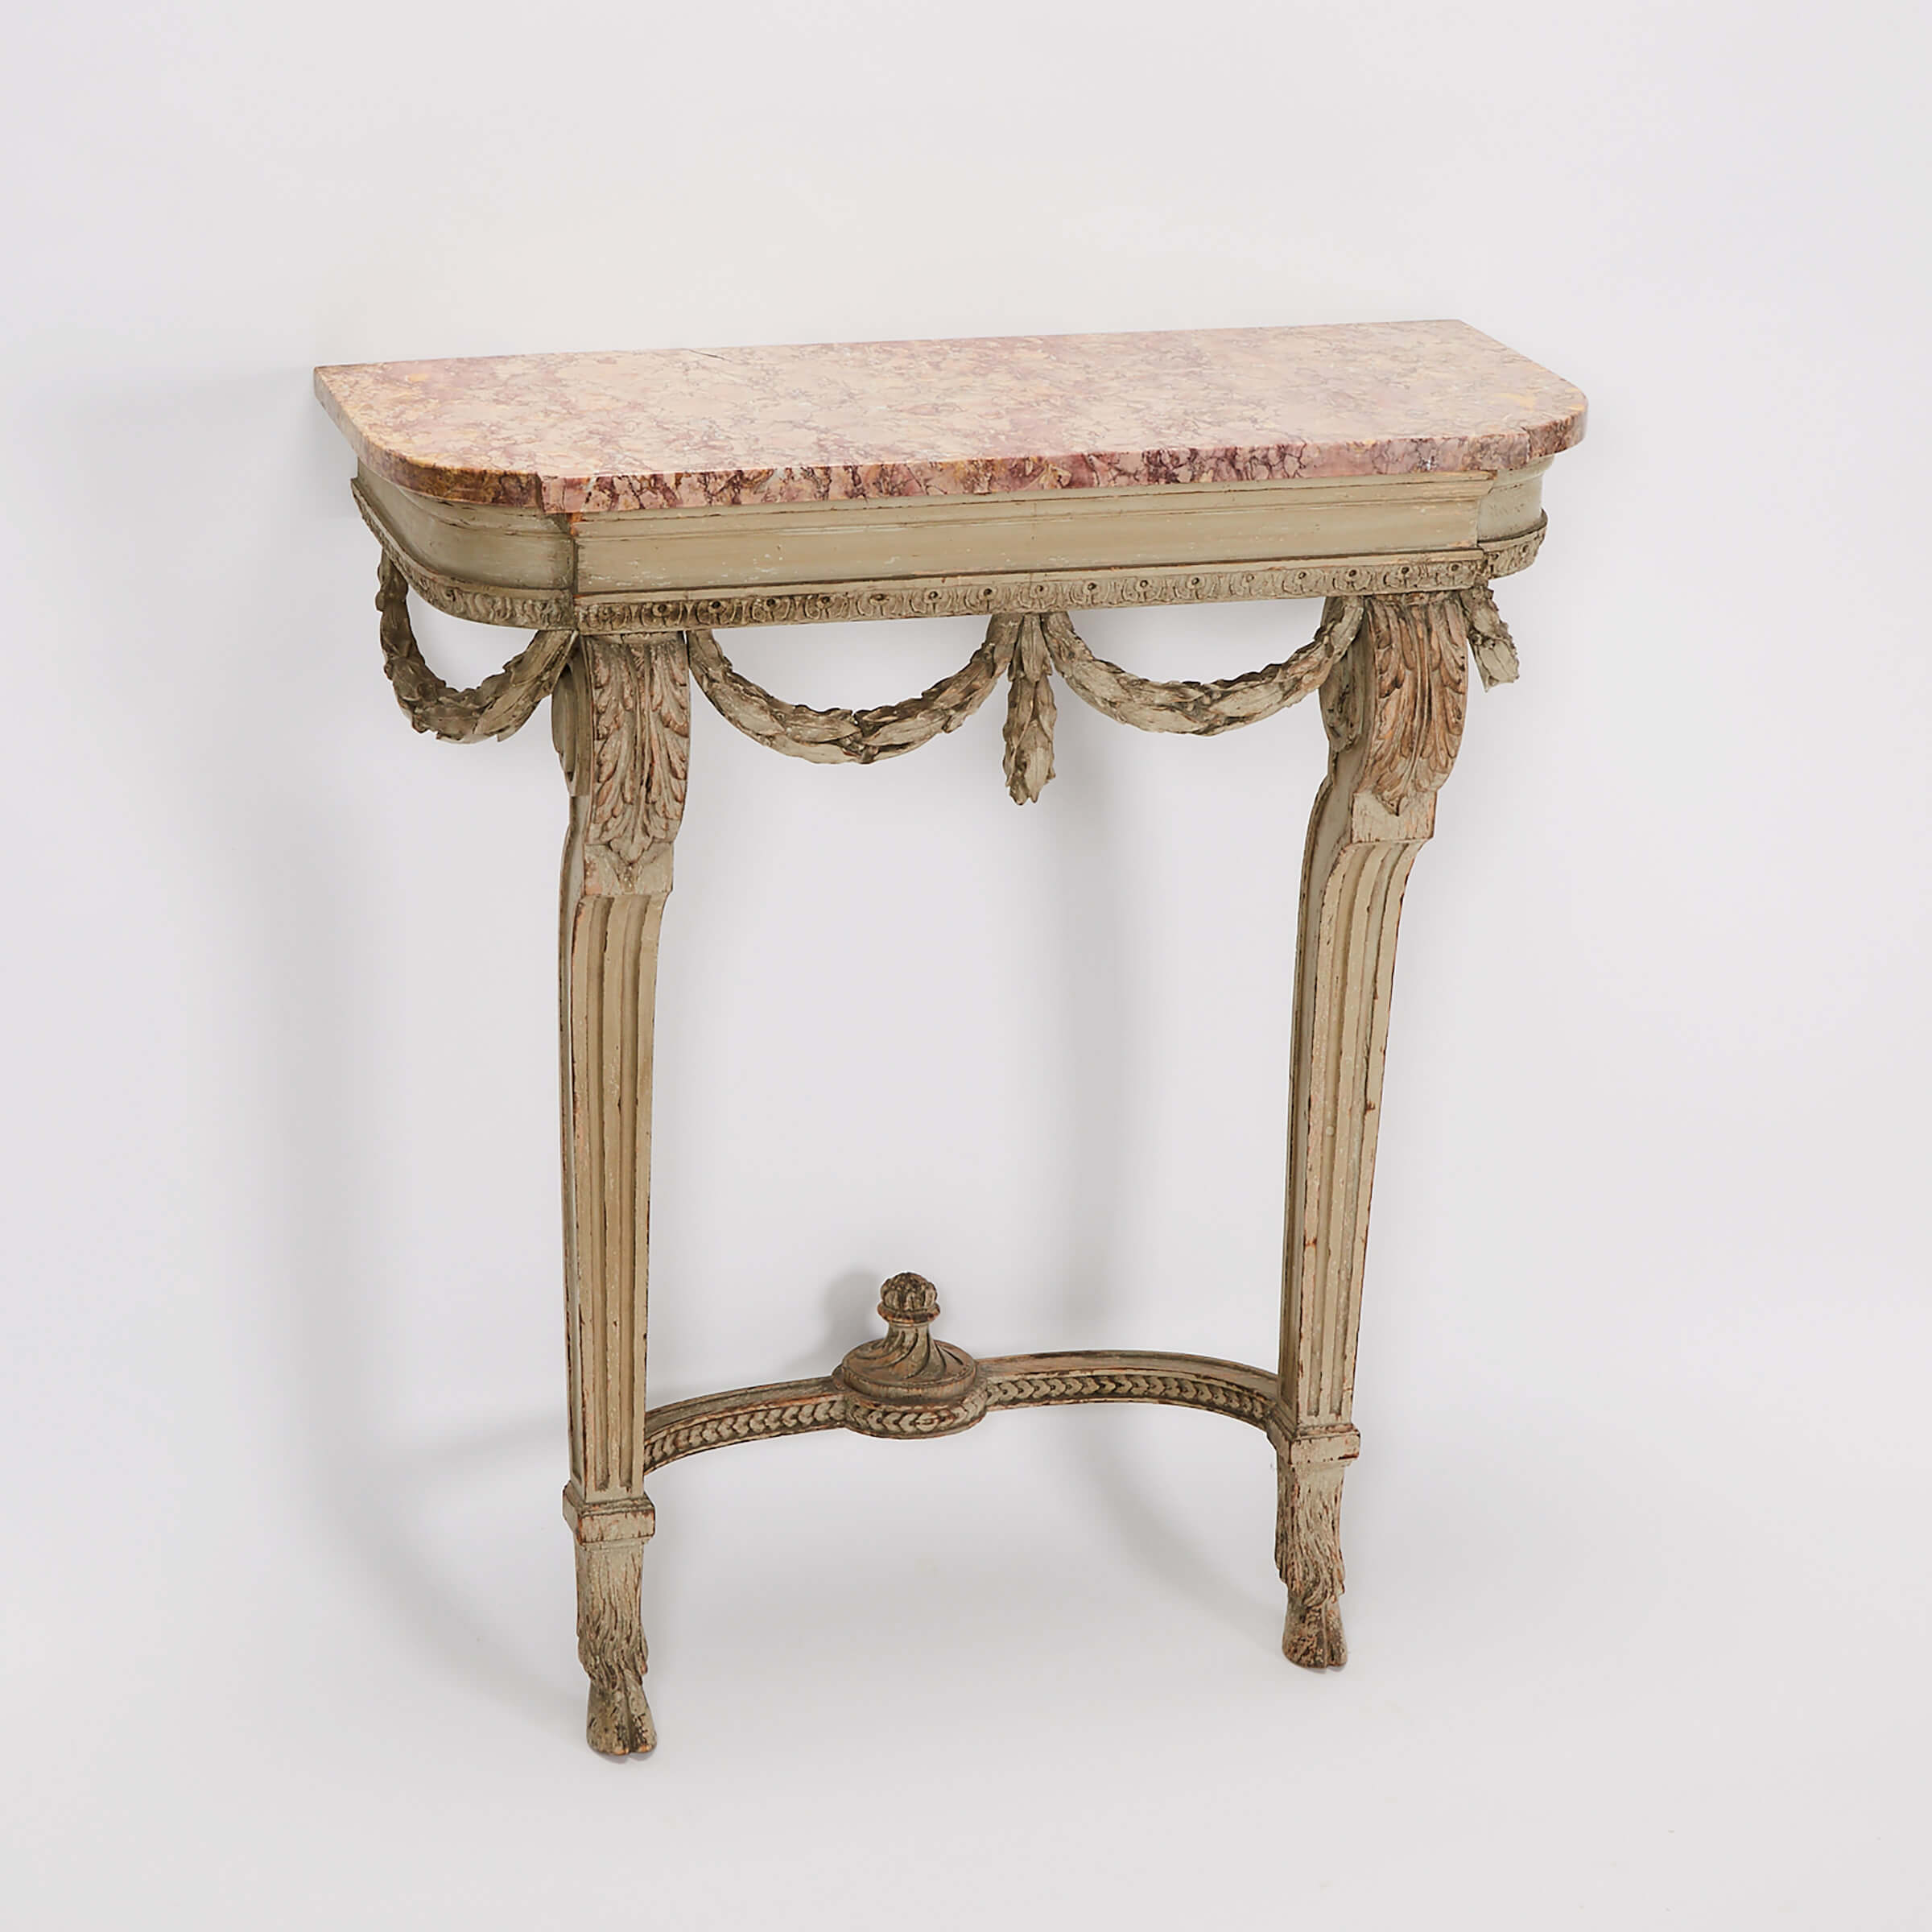 Neoclassical Italian Carved and Painted Console Table, early 20th century